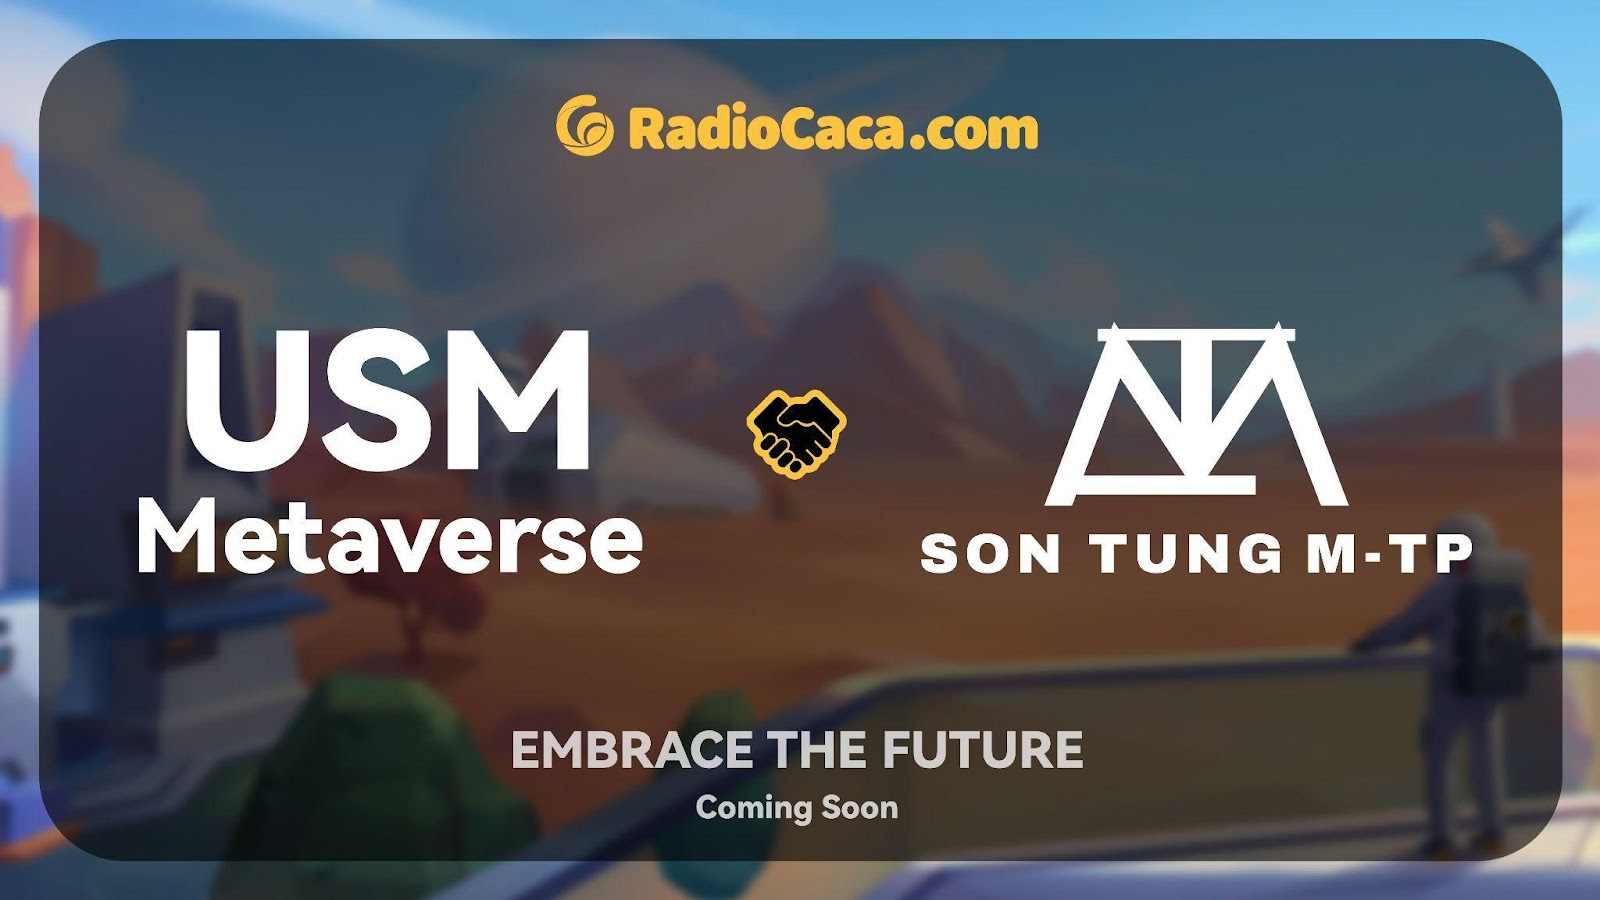 Following French Montana, Son Tung M-TP, One of Vietnam's Top Celebrity Singers, Joins Radio Caca's USM Metaverse